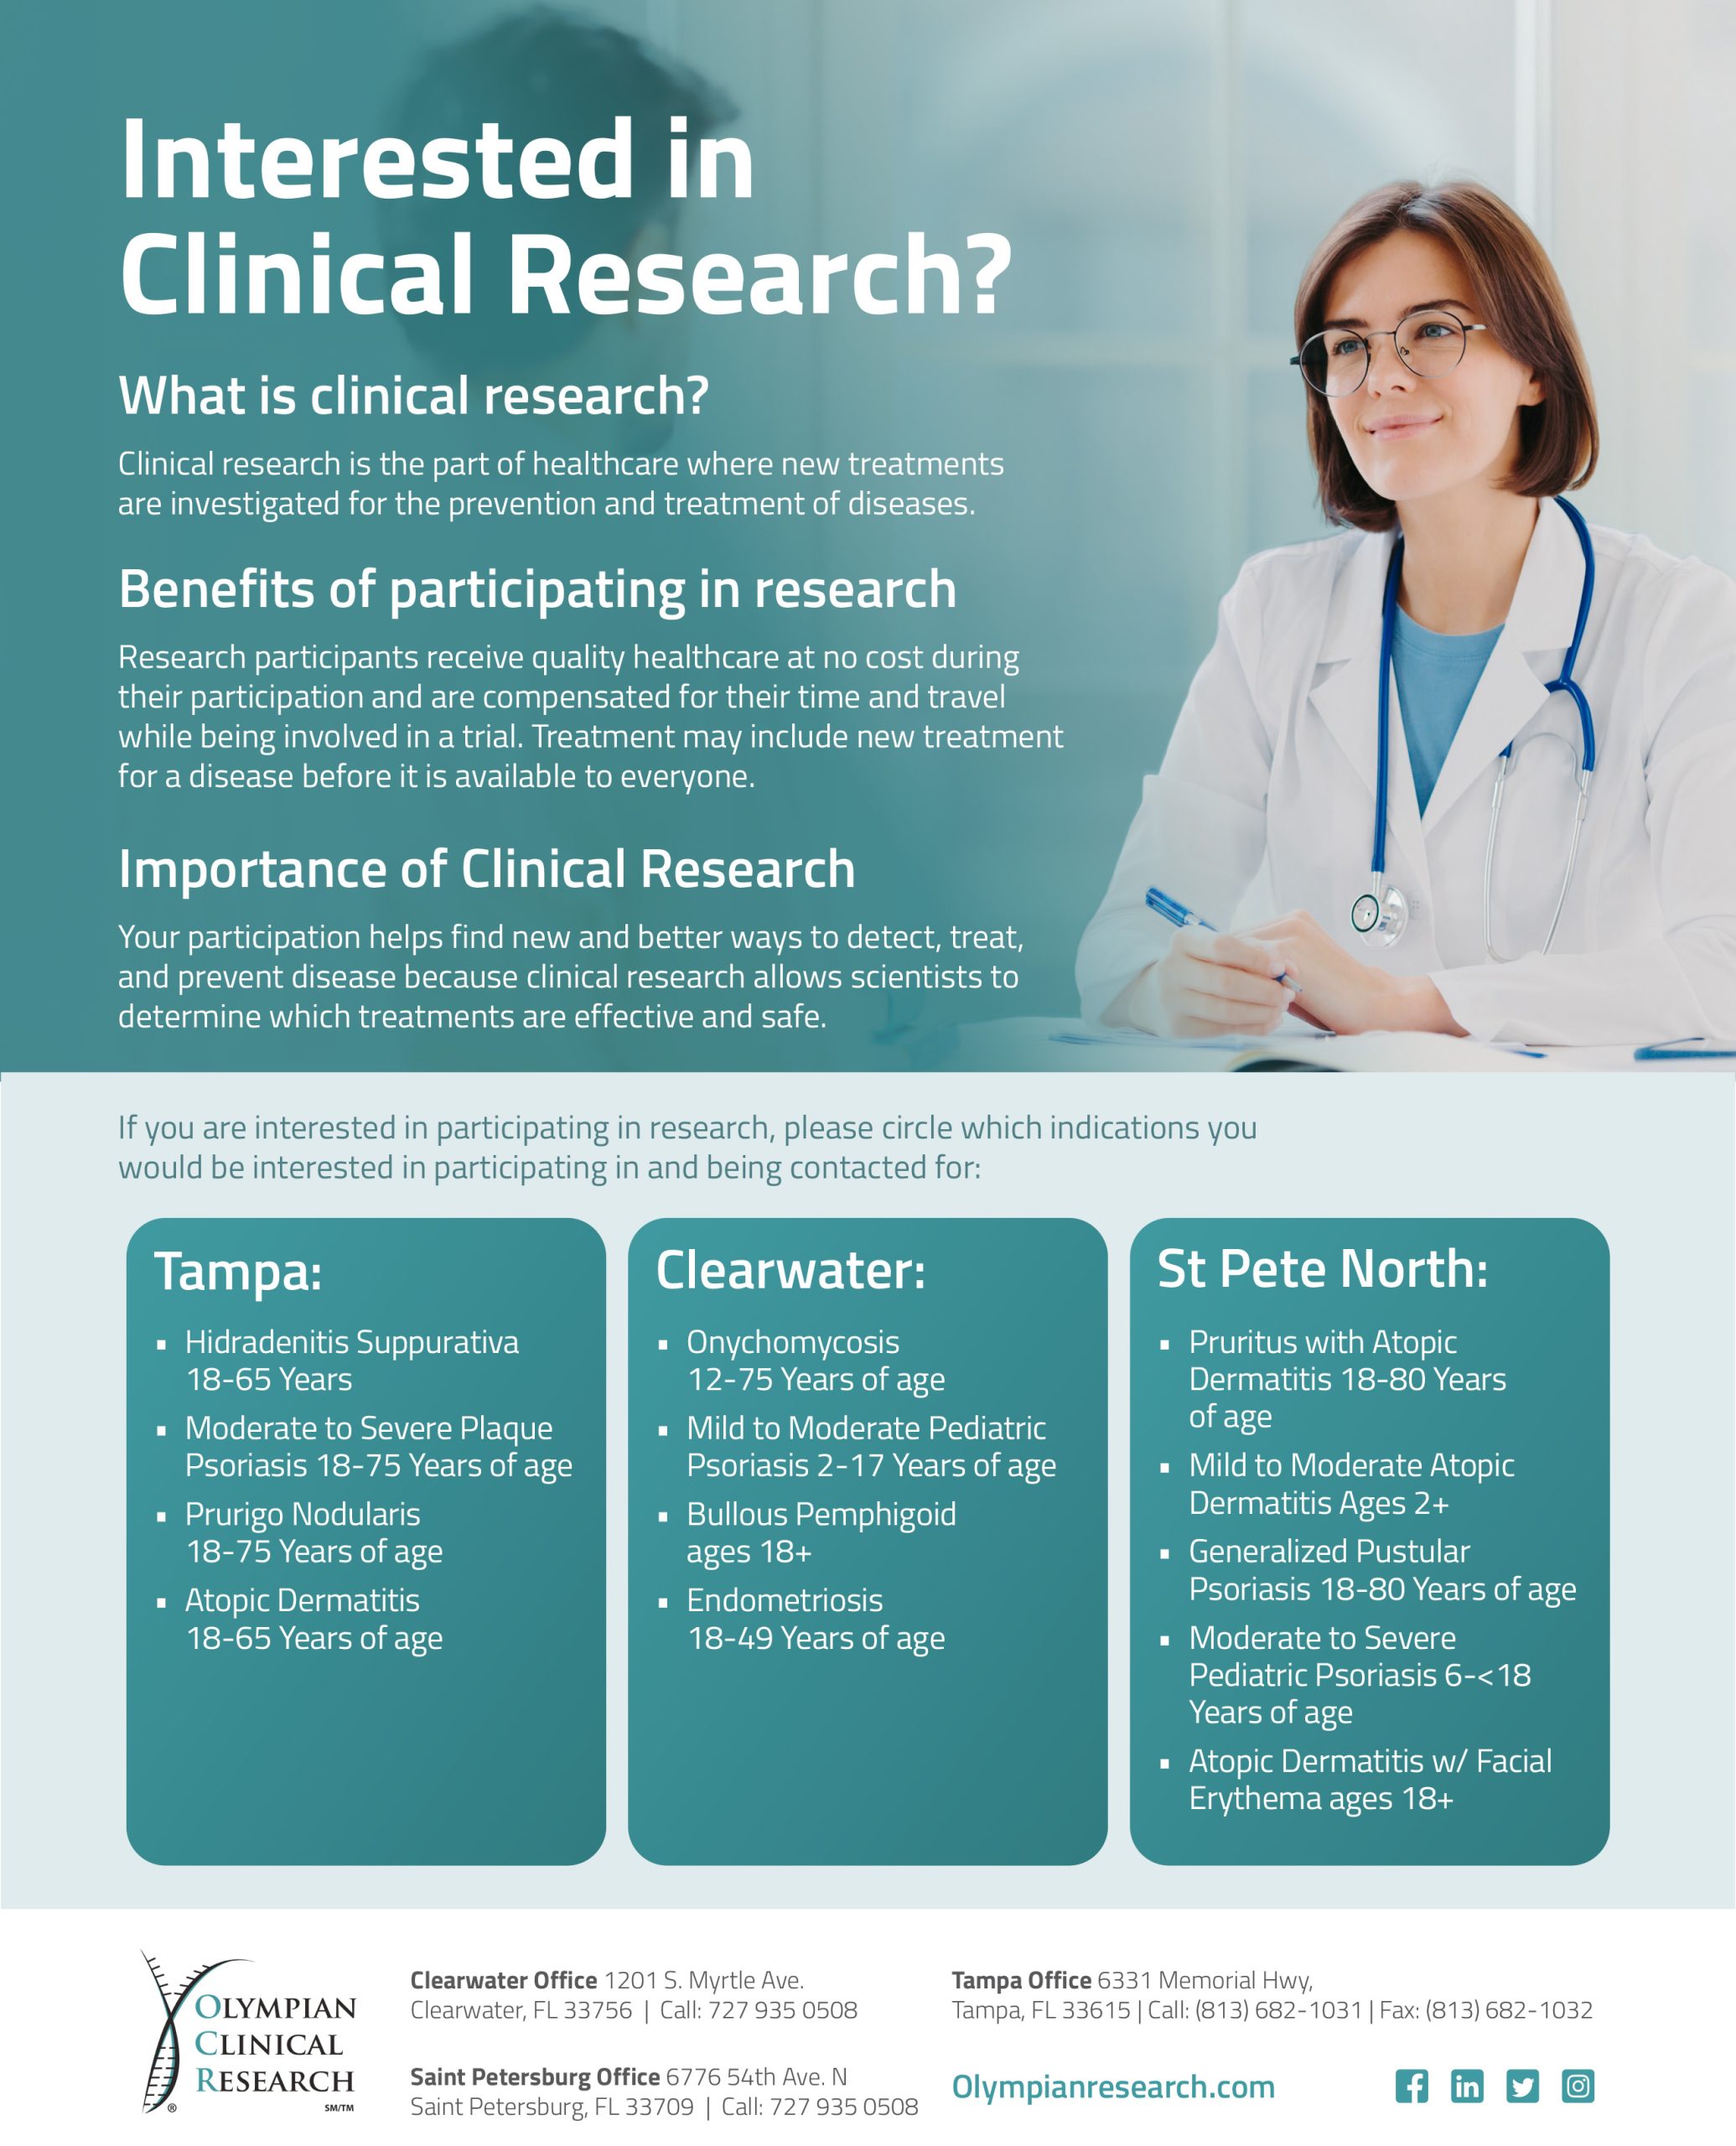 clinical research courses with placement